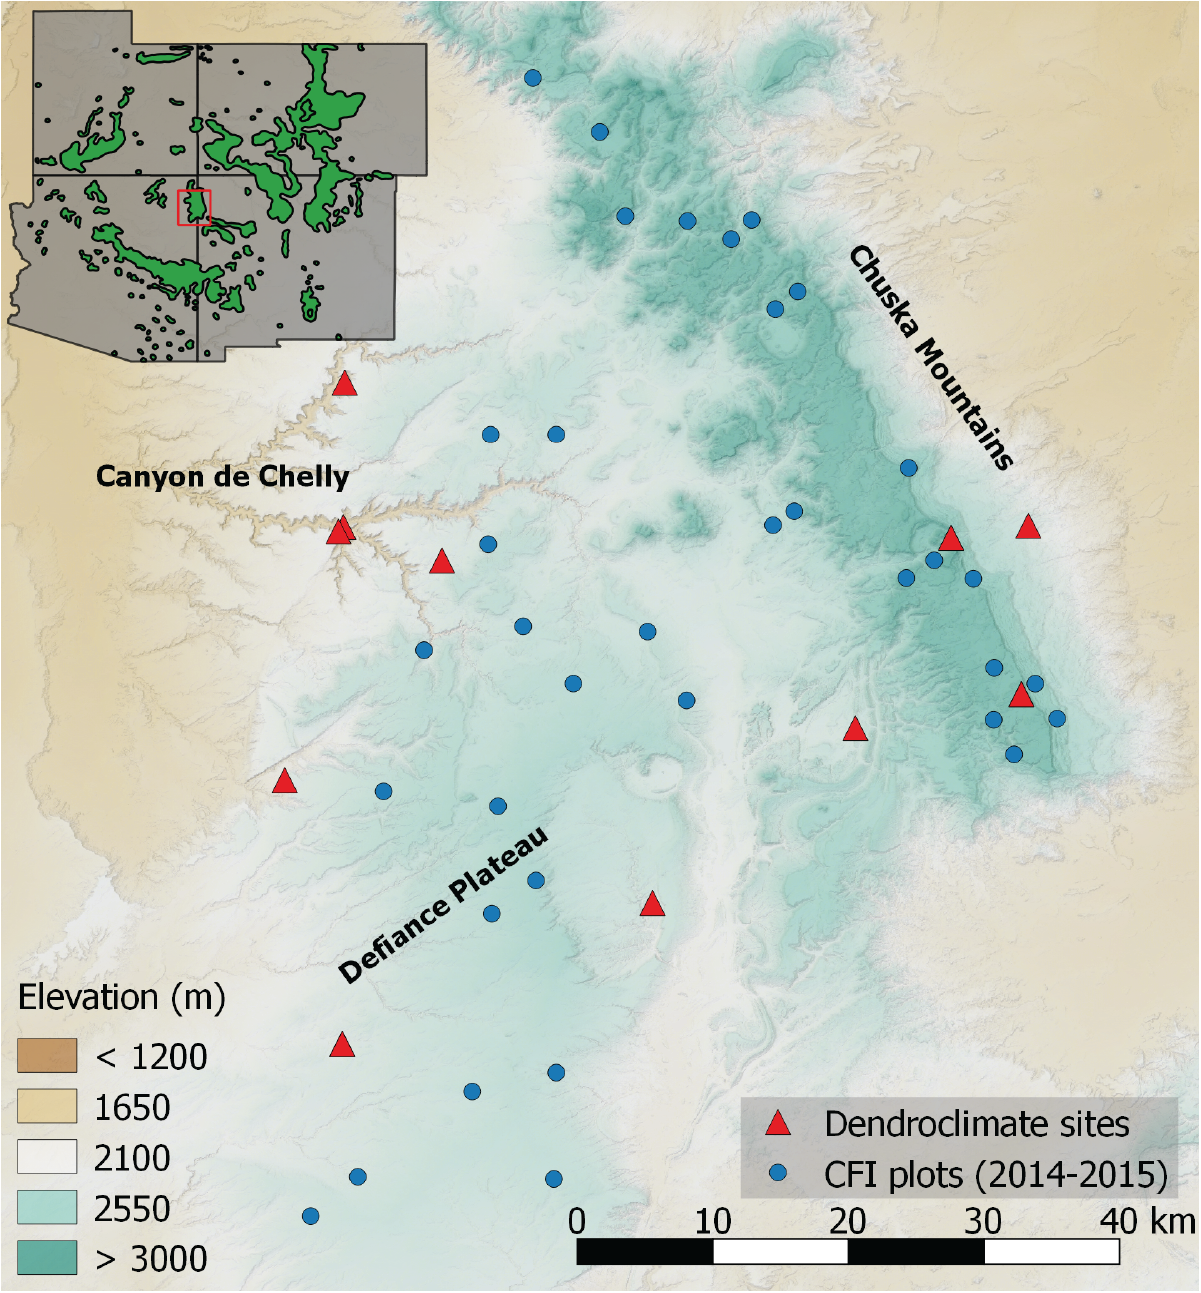 Spatial distribution of tree-ring sample sites and CFI plots on the Navajo forest. Inset map shows the location of the study area in the Four Corners, with green areas representing the range of ponderosa pine.